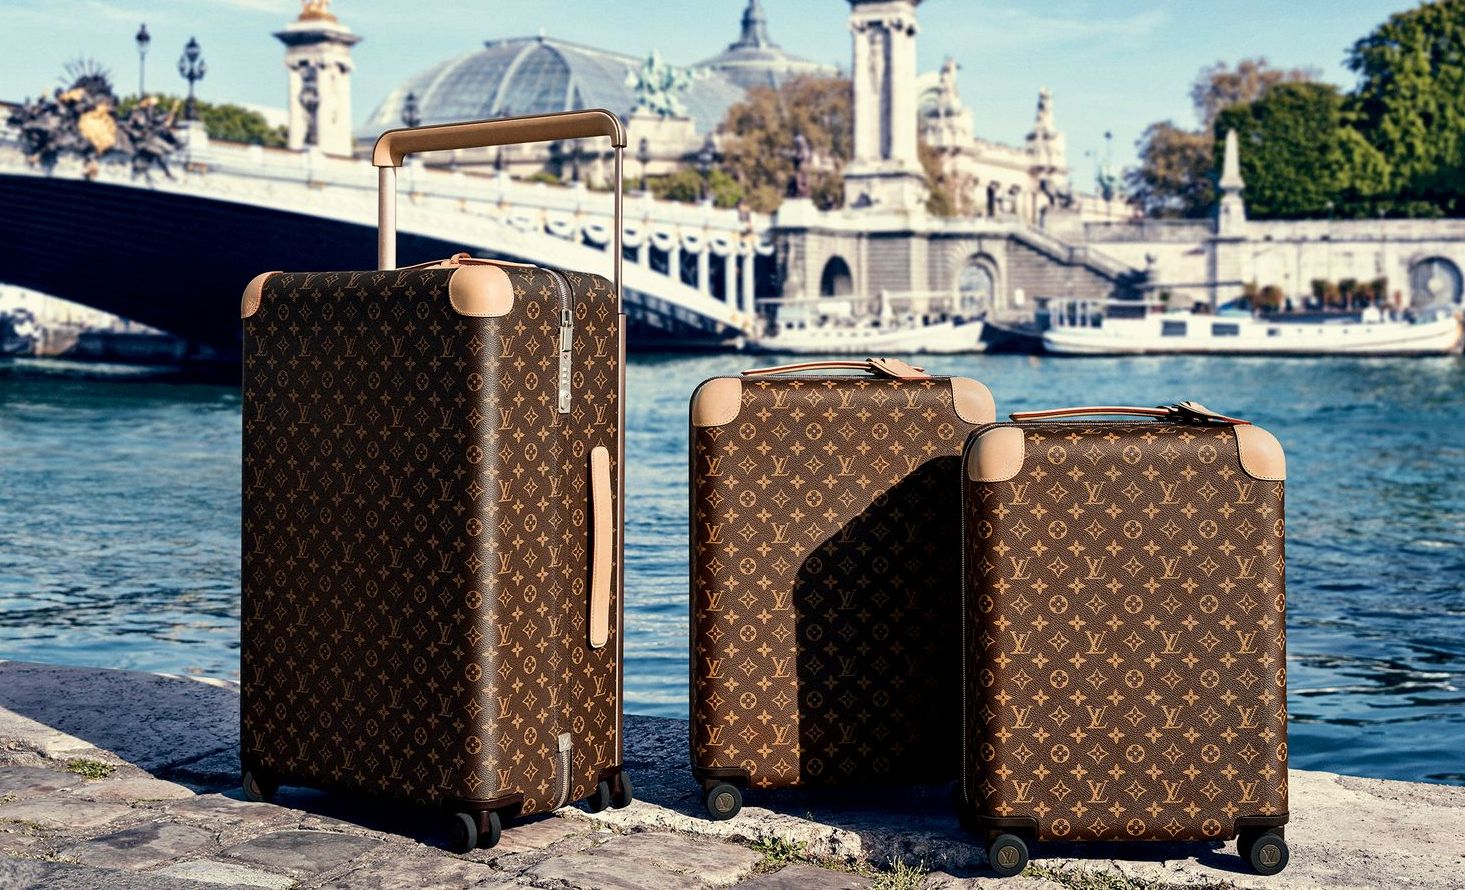 Horizon 55 is the Latest Rolling Luggage Range by Louis Vuitton